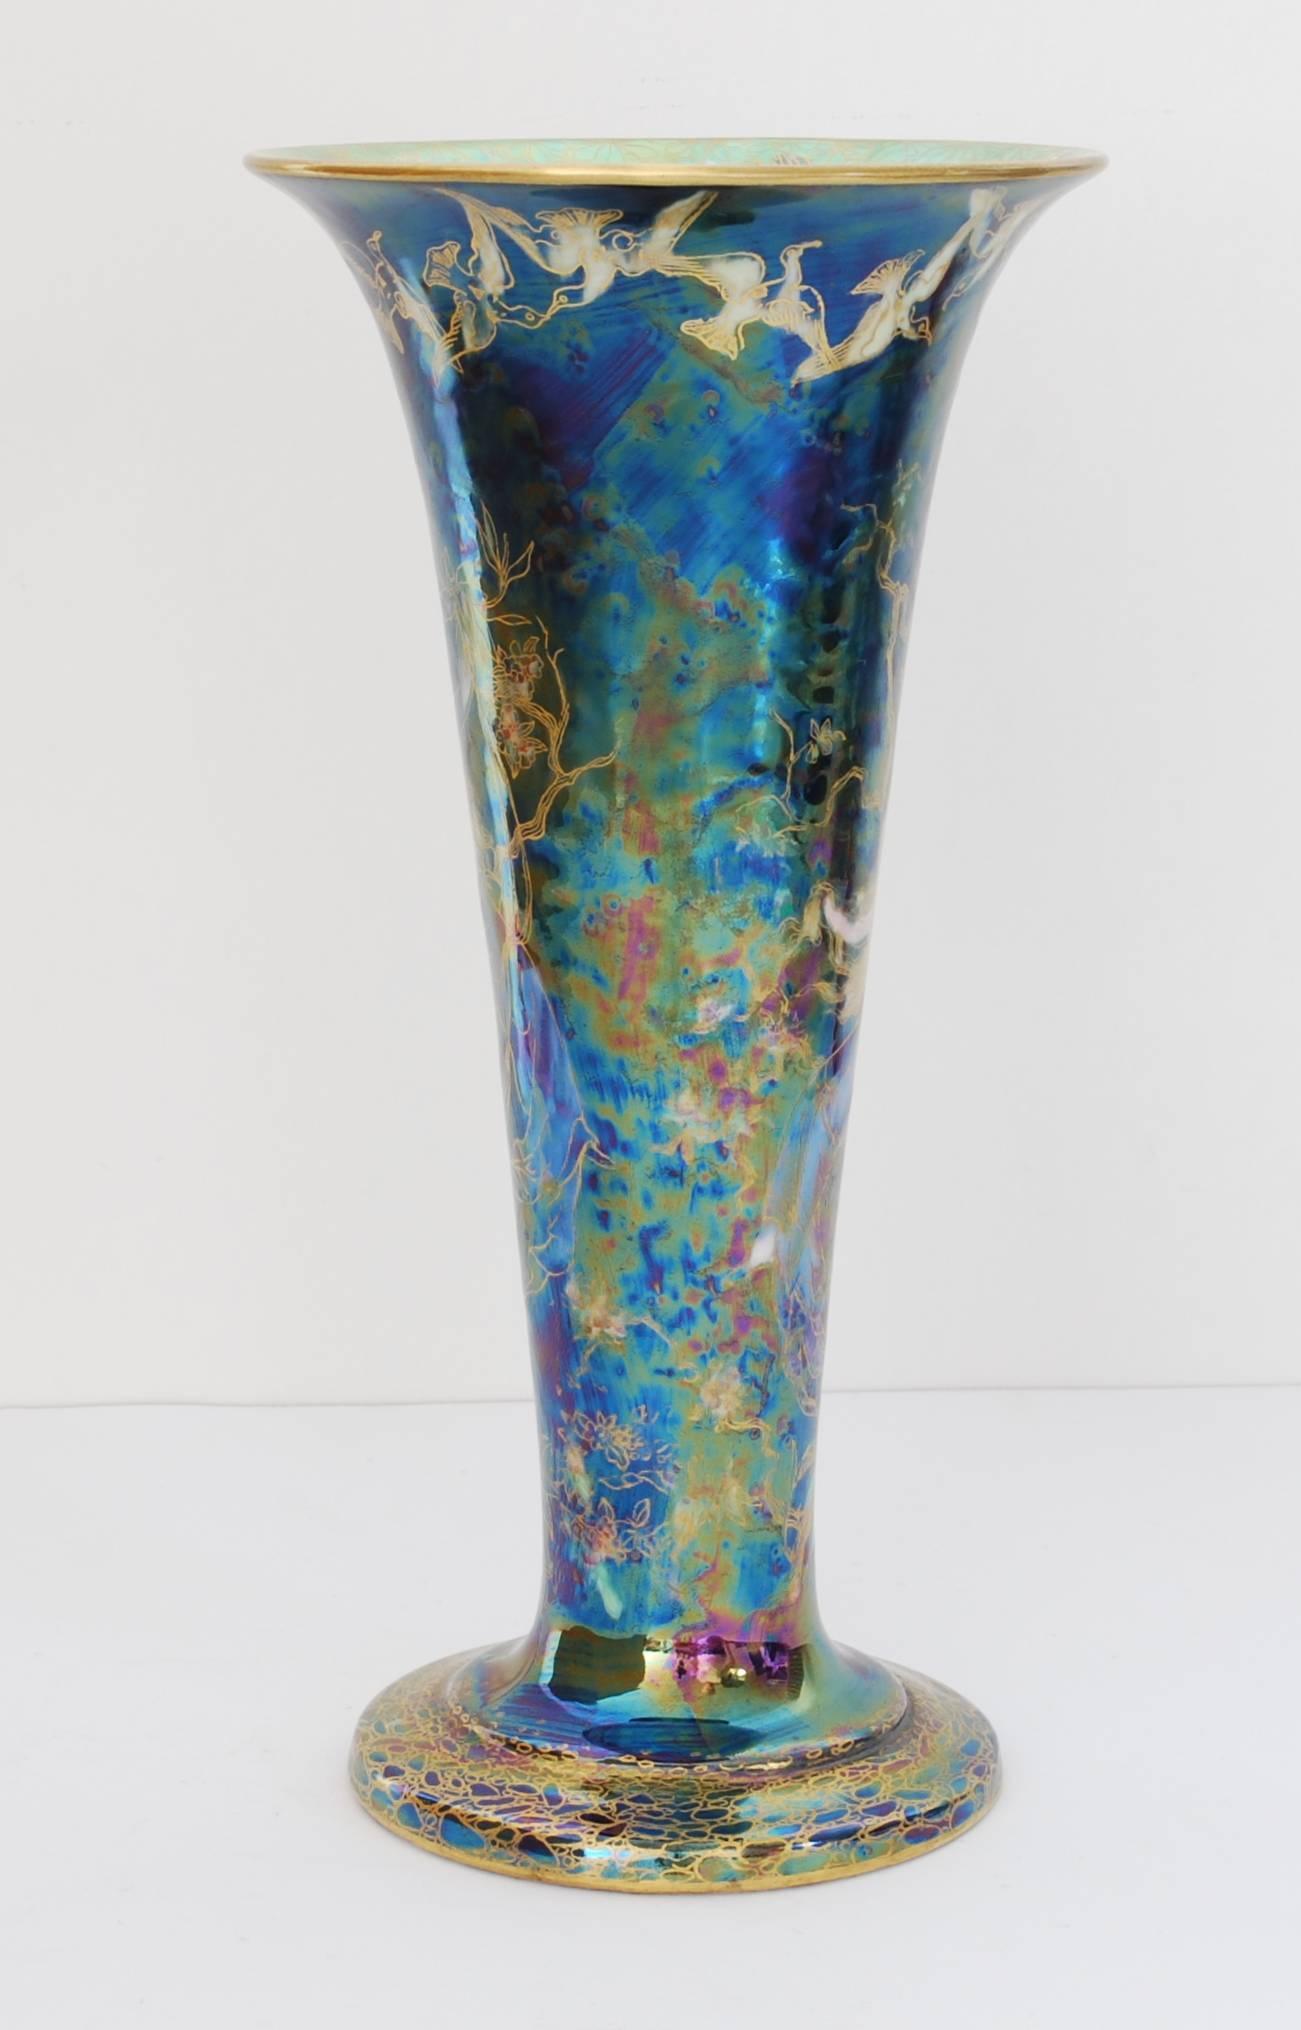 A trumpet-shaped vase in black Fairyland lustre, decorated with the butterfly ladies pattern.

At 10”, this is the largest of the three sizes in which this vase was produced.